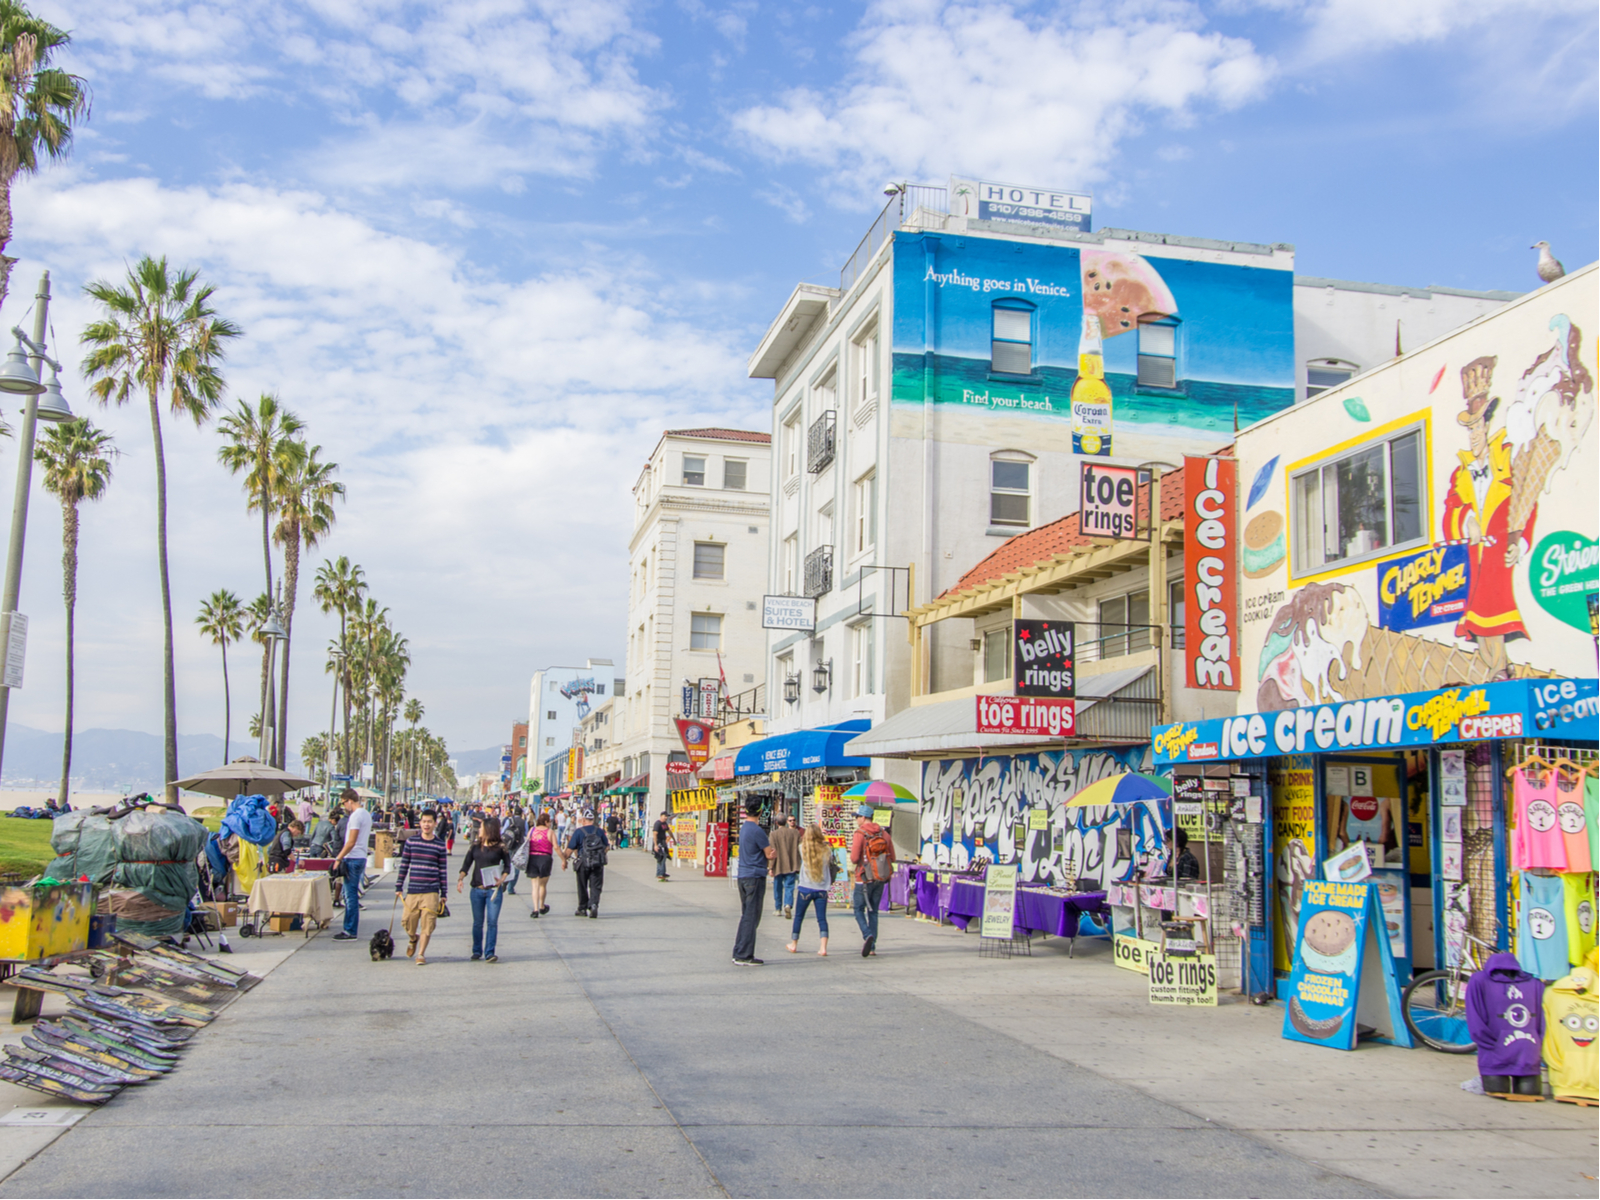 Venice beach boardwalk, one of the best things to do in Los Angeles, pictured on a clear and sunny day